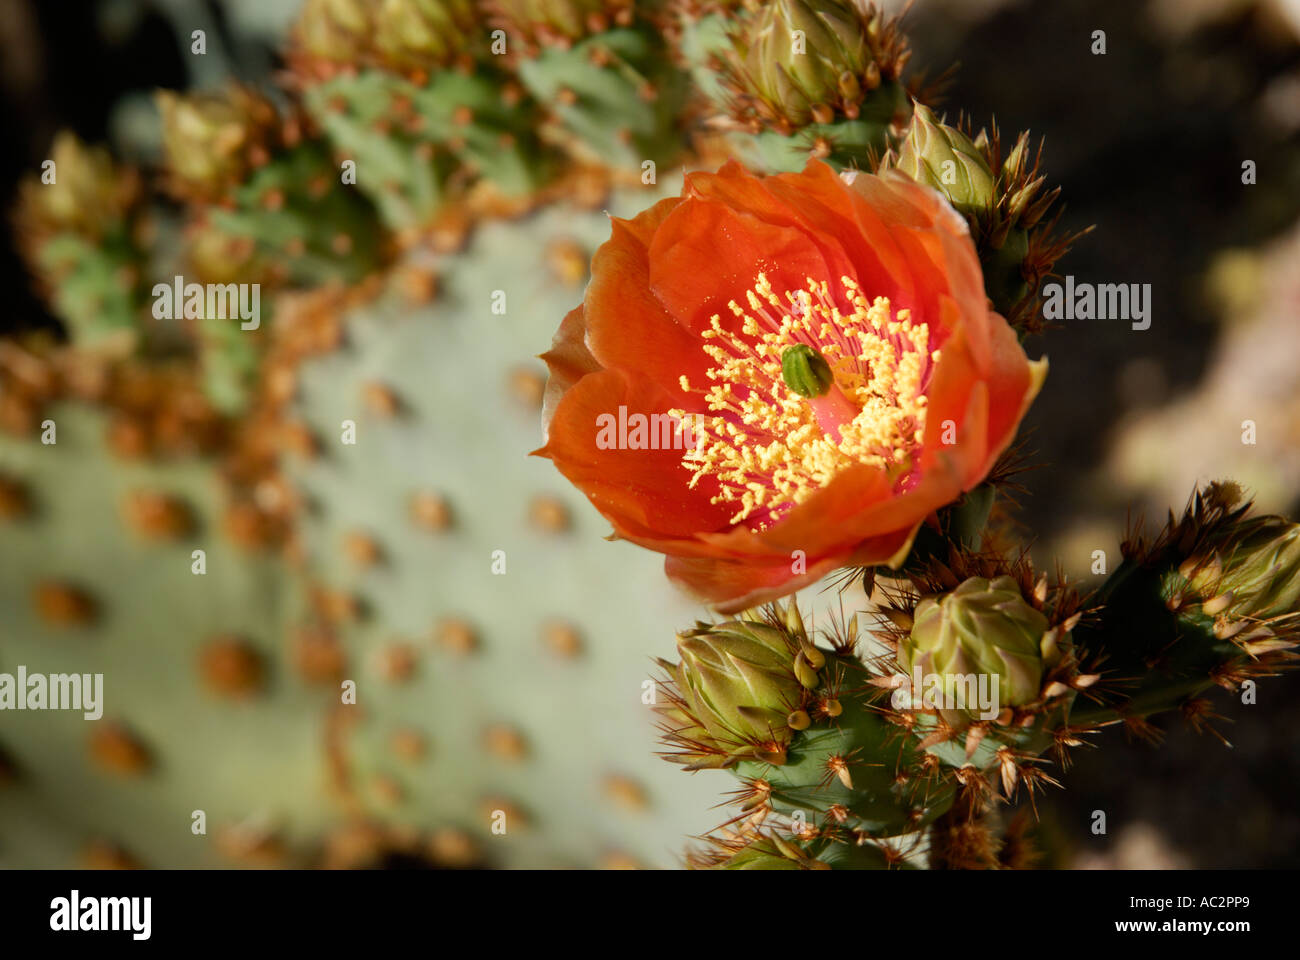 Red flower of prickly pear cactus, Opuntia sp, Sonora Desert Stock Photo